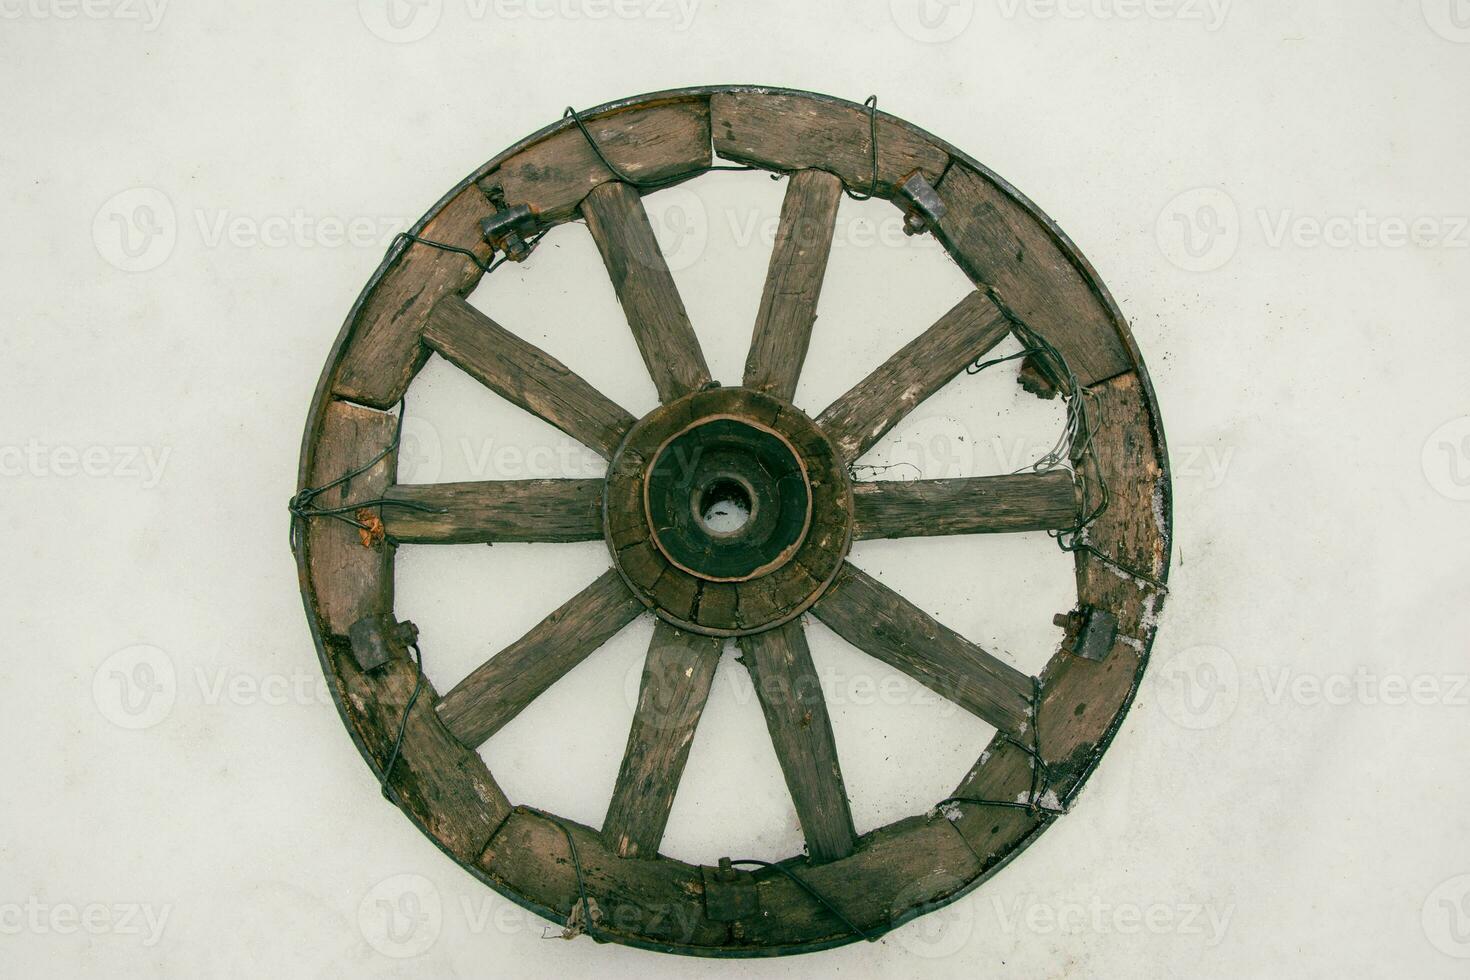 Vintage Wooden Wheel from an Old Cart, Rustic Country Decor Element photo